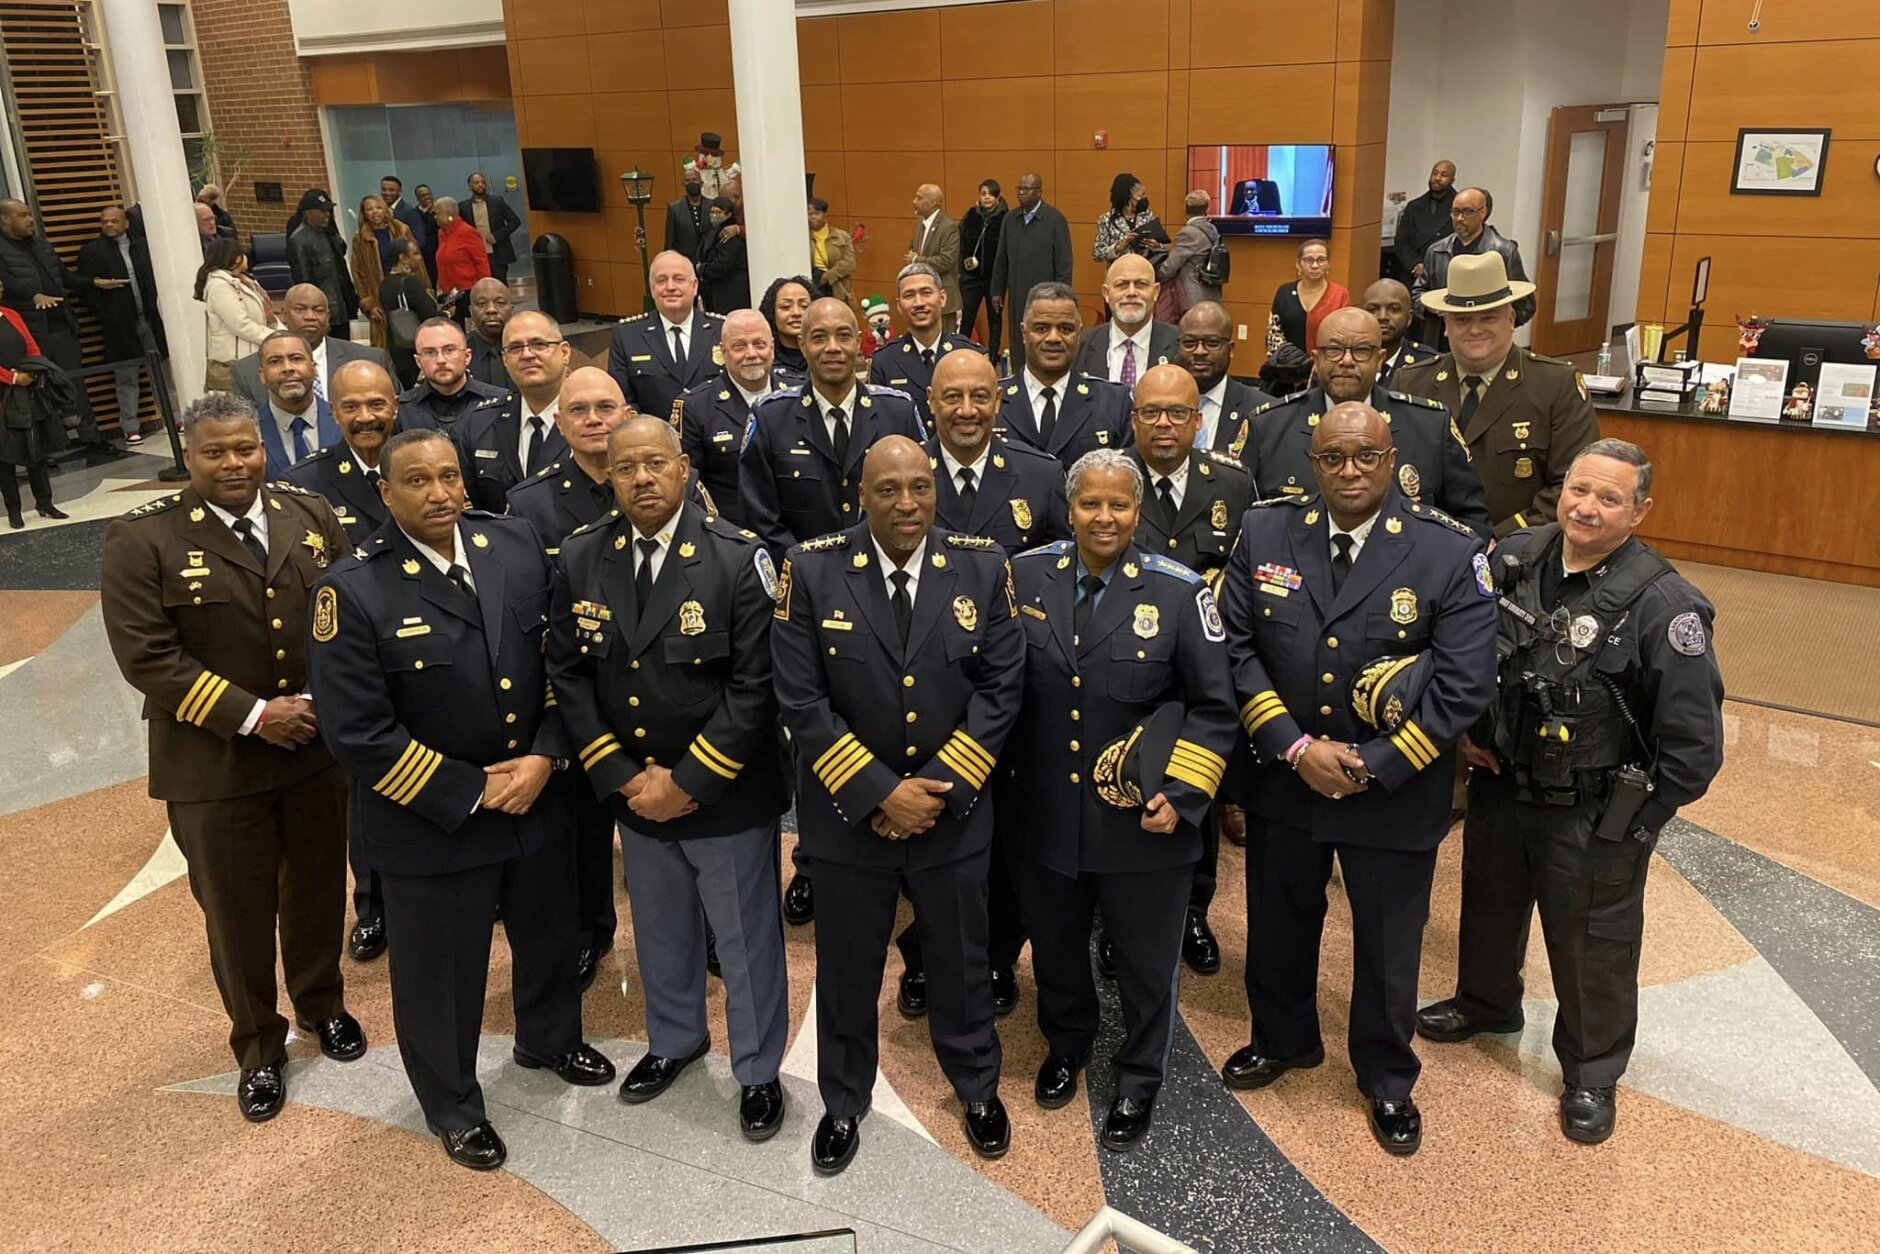 <h3><strong>Dwayne A. Preston</strong></h3>
<p>After years with the Prince George&#8217;s County Police Department and as a leader in Bowie, Maryland&#8217;s sworn force, <a href="https://wtop.com/prince-georges-county/2024/01/bowie-welcomes-first-black-police-chief-in-historic-ceremony/" target="_blank" rel="noopener">Dwayne Preston became the first Black person to hold the job of Chief of Police for the city</a>.</p>
<p>“After an exhaustive, nationwide search, I am proud to say that Dwayne Preston is the best person to head up the Bowie Police Department,” City Manager Alfred Lott said in a late December <a href="https://www.facebook.com/photo/?fbid=761129516053175&amp;set=pcb.761139689385491" target="_blank" rel="noopener">news release</a>. “He understands Bowie, he has built strong bridges between city and county police departments, and I know he will continue the fine tradition of service with integrity and community policing that the Bowie Police Department has been known for.”</p>
